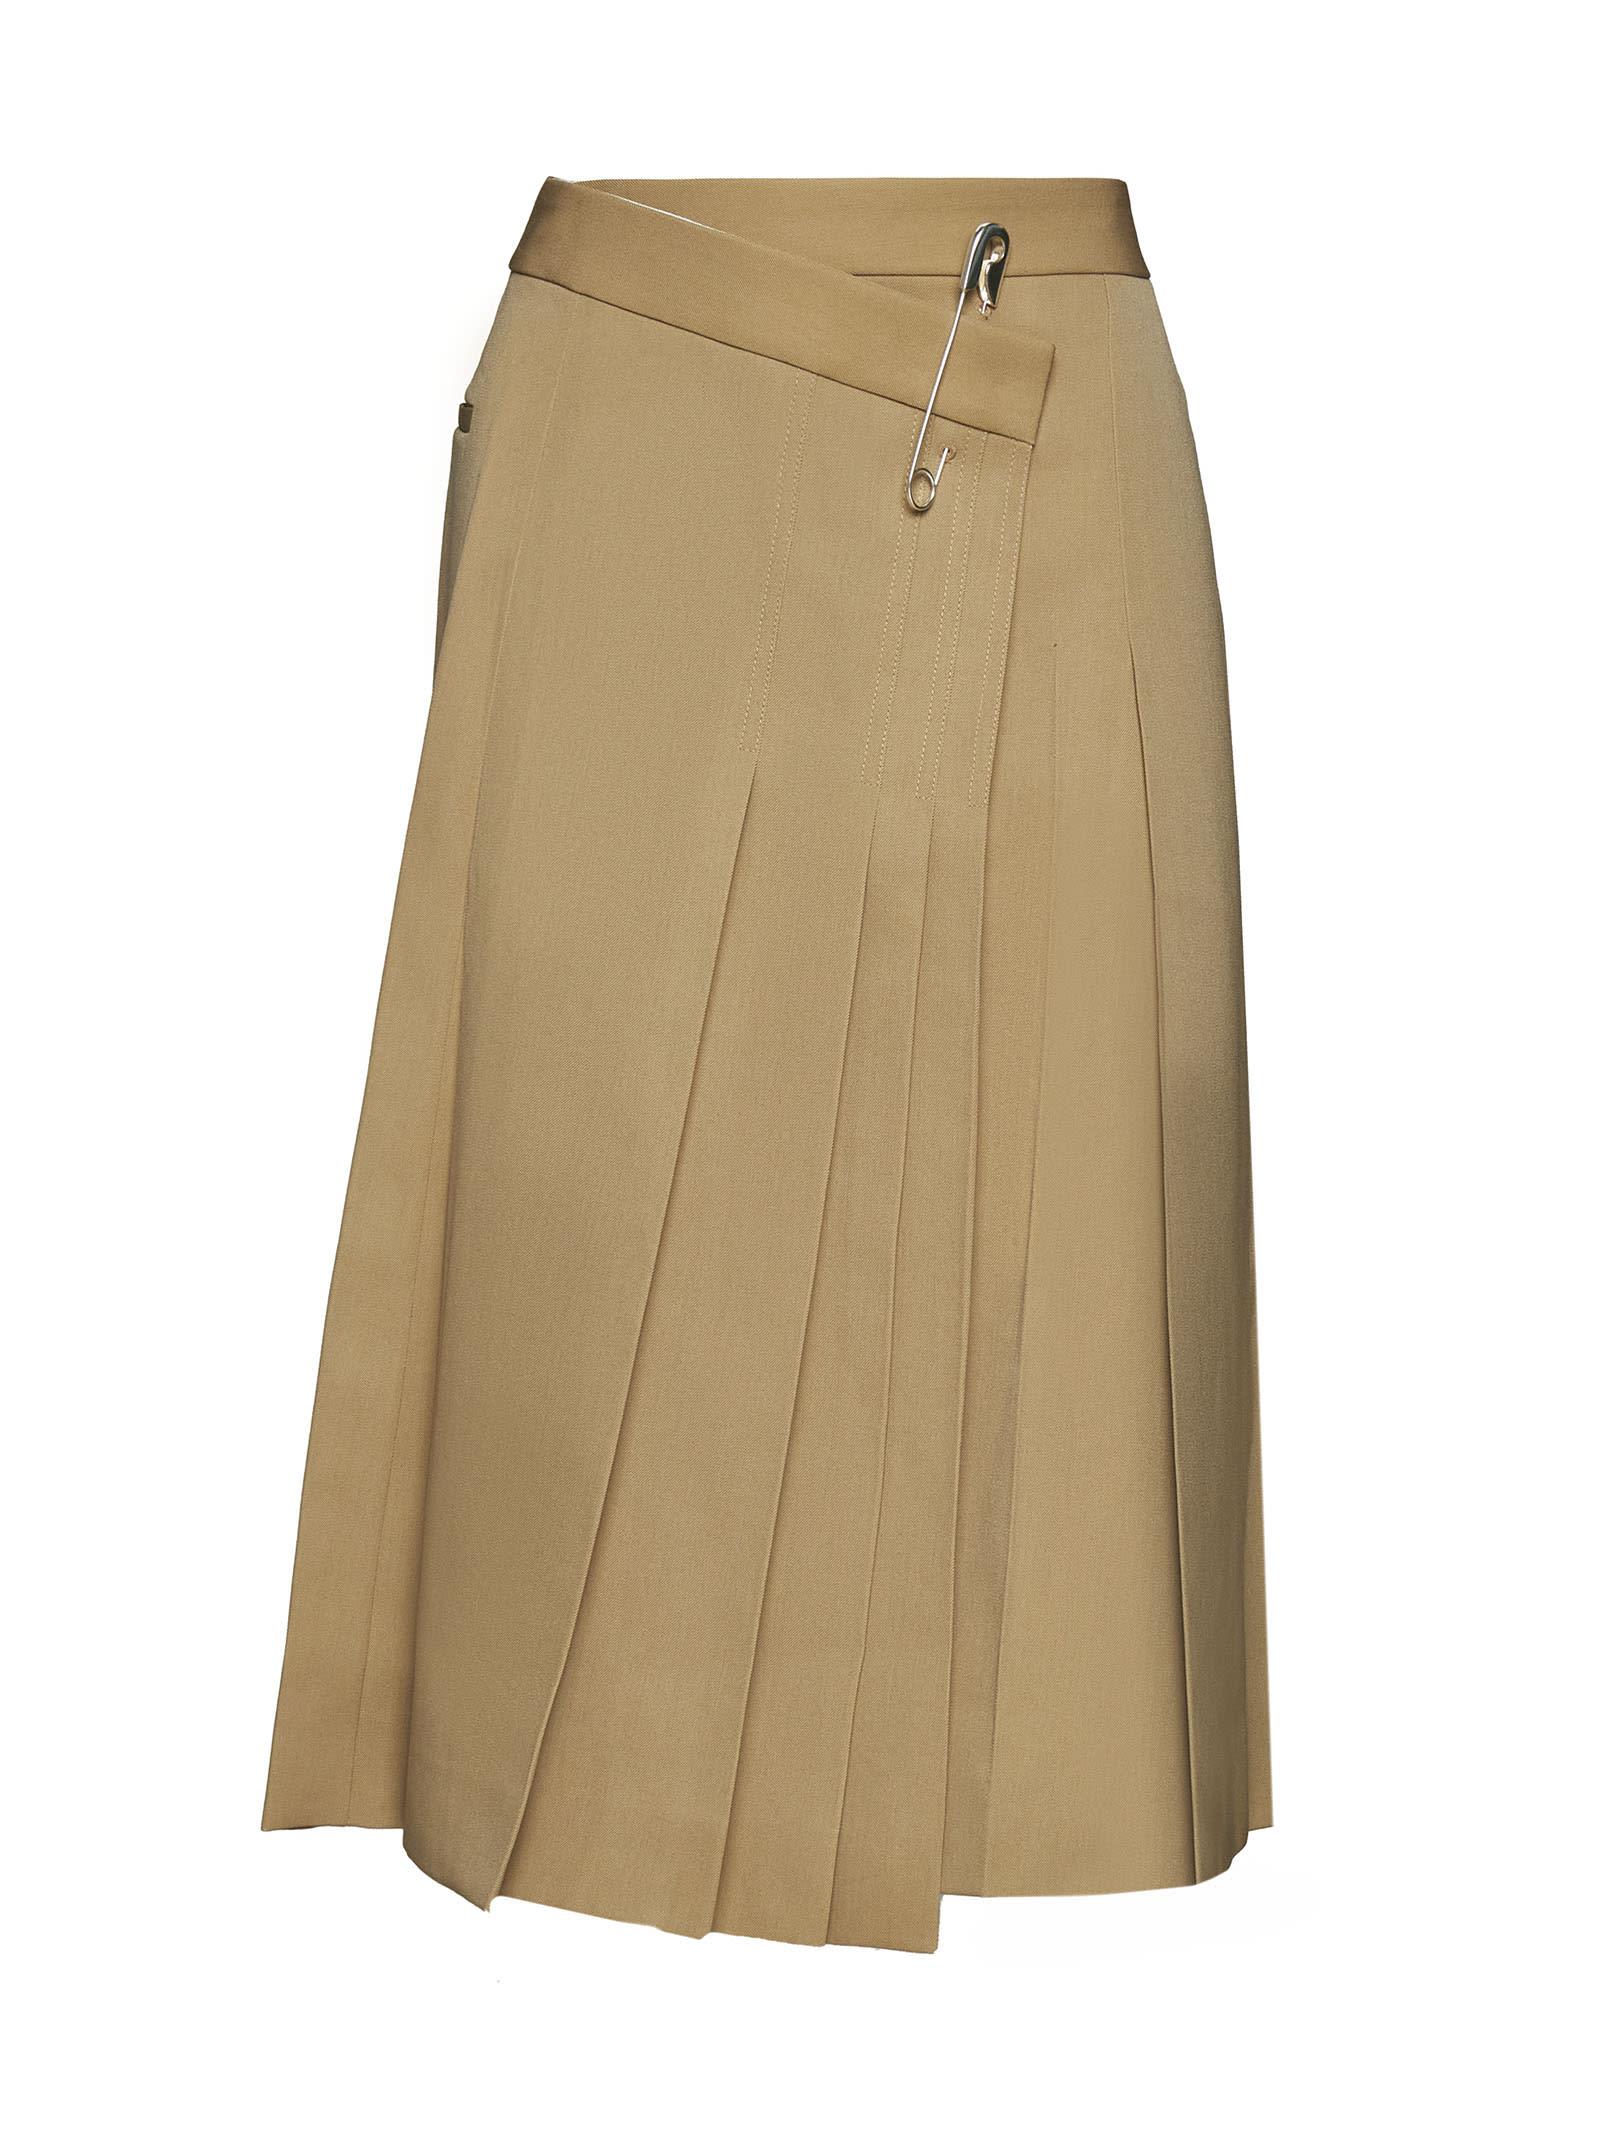 Tory Burch Skirt in Natural | Lyst UK